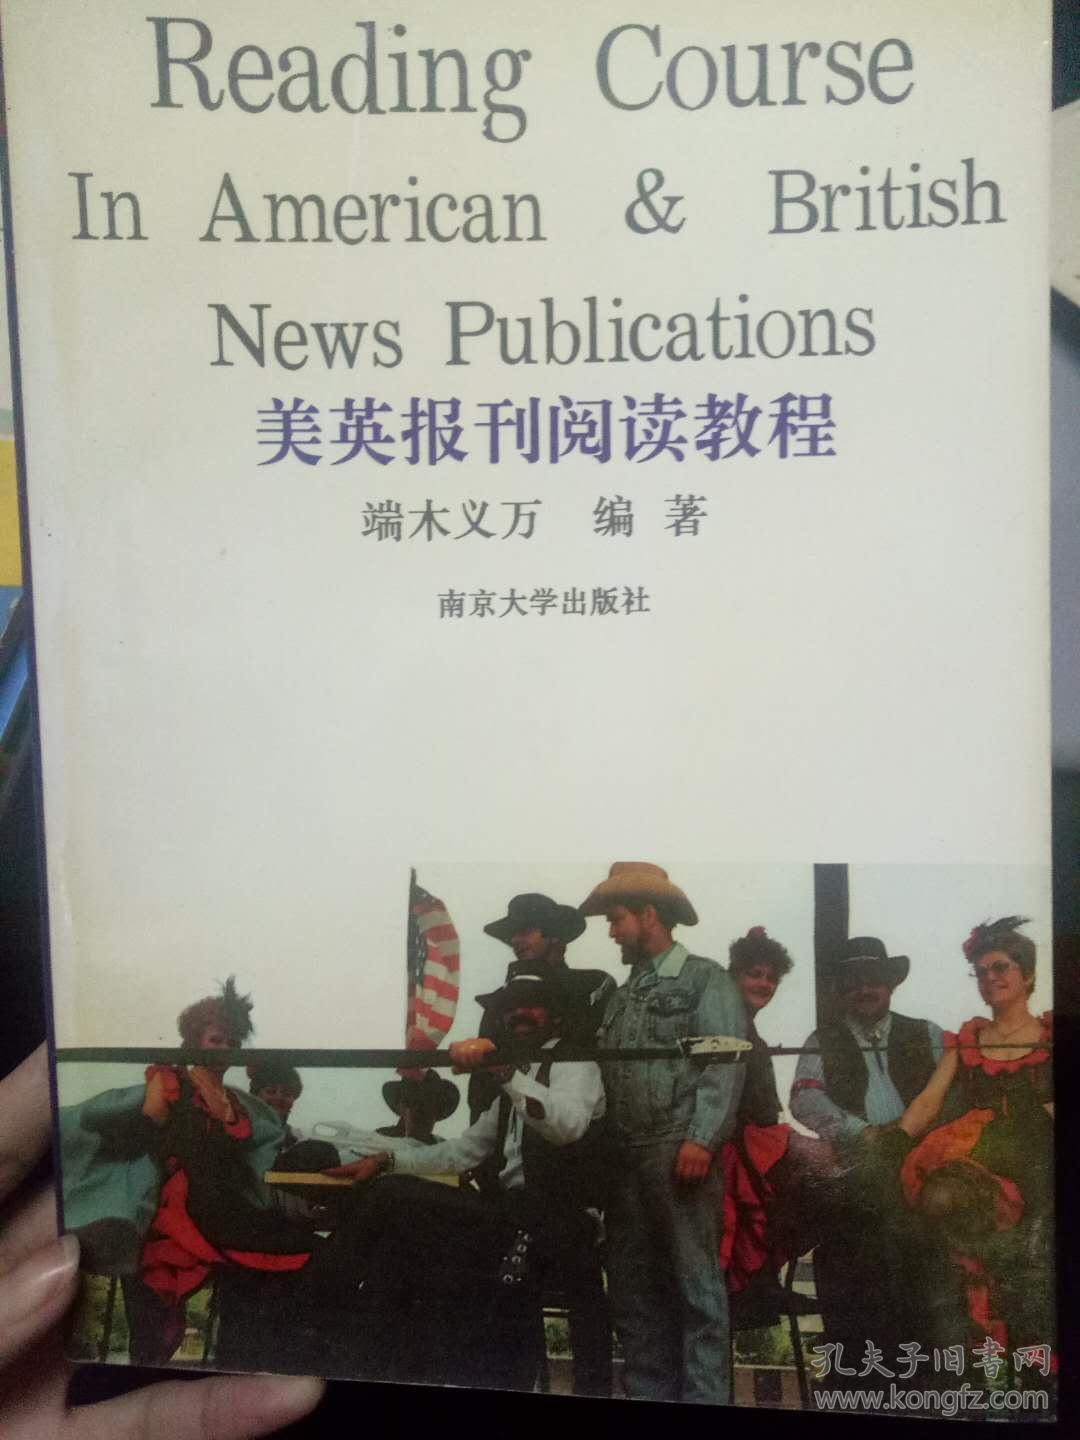 《Reading Course In American &British News Publications 美英报刊阅读教程》